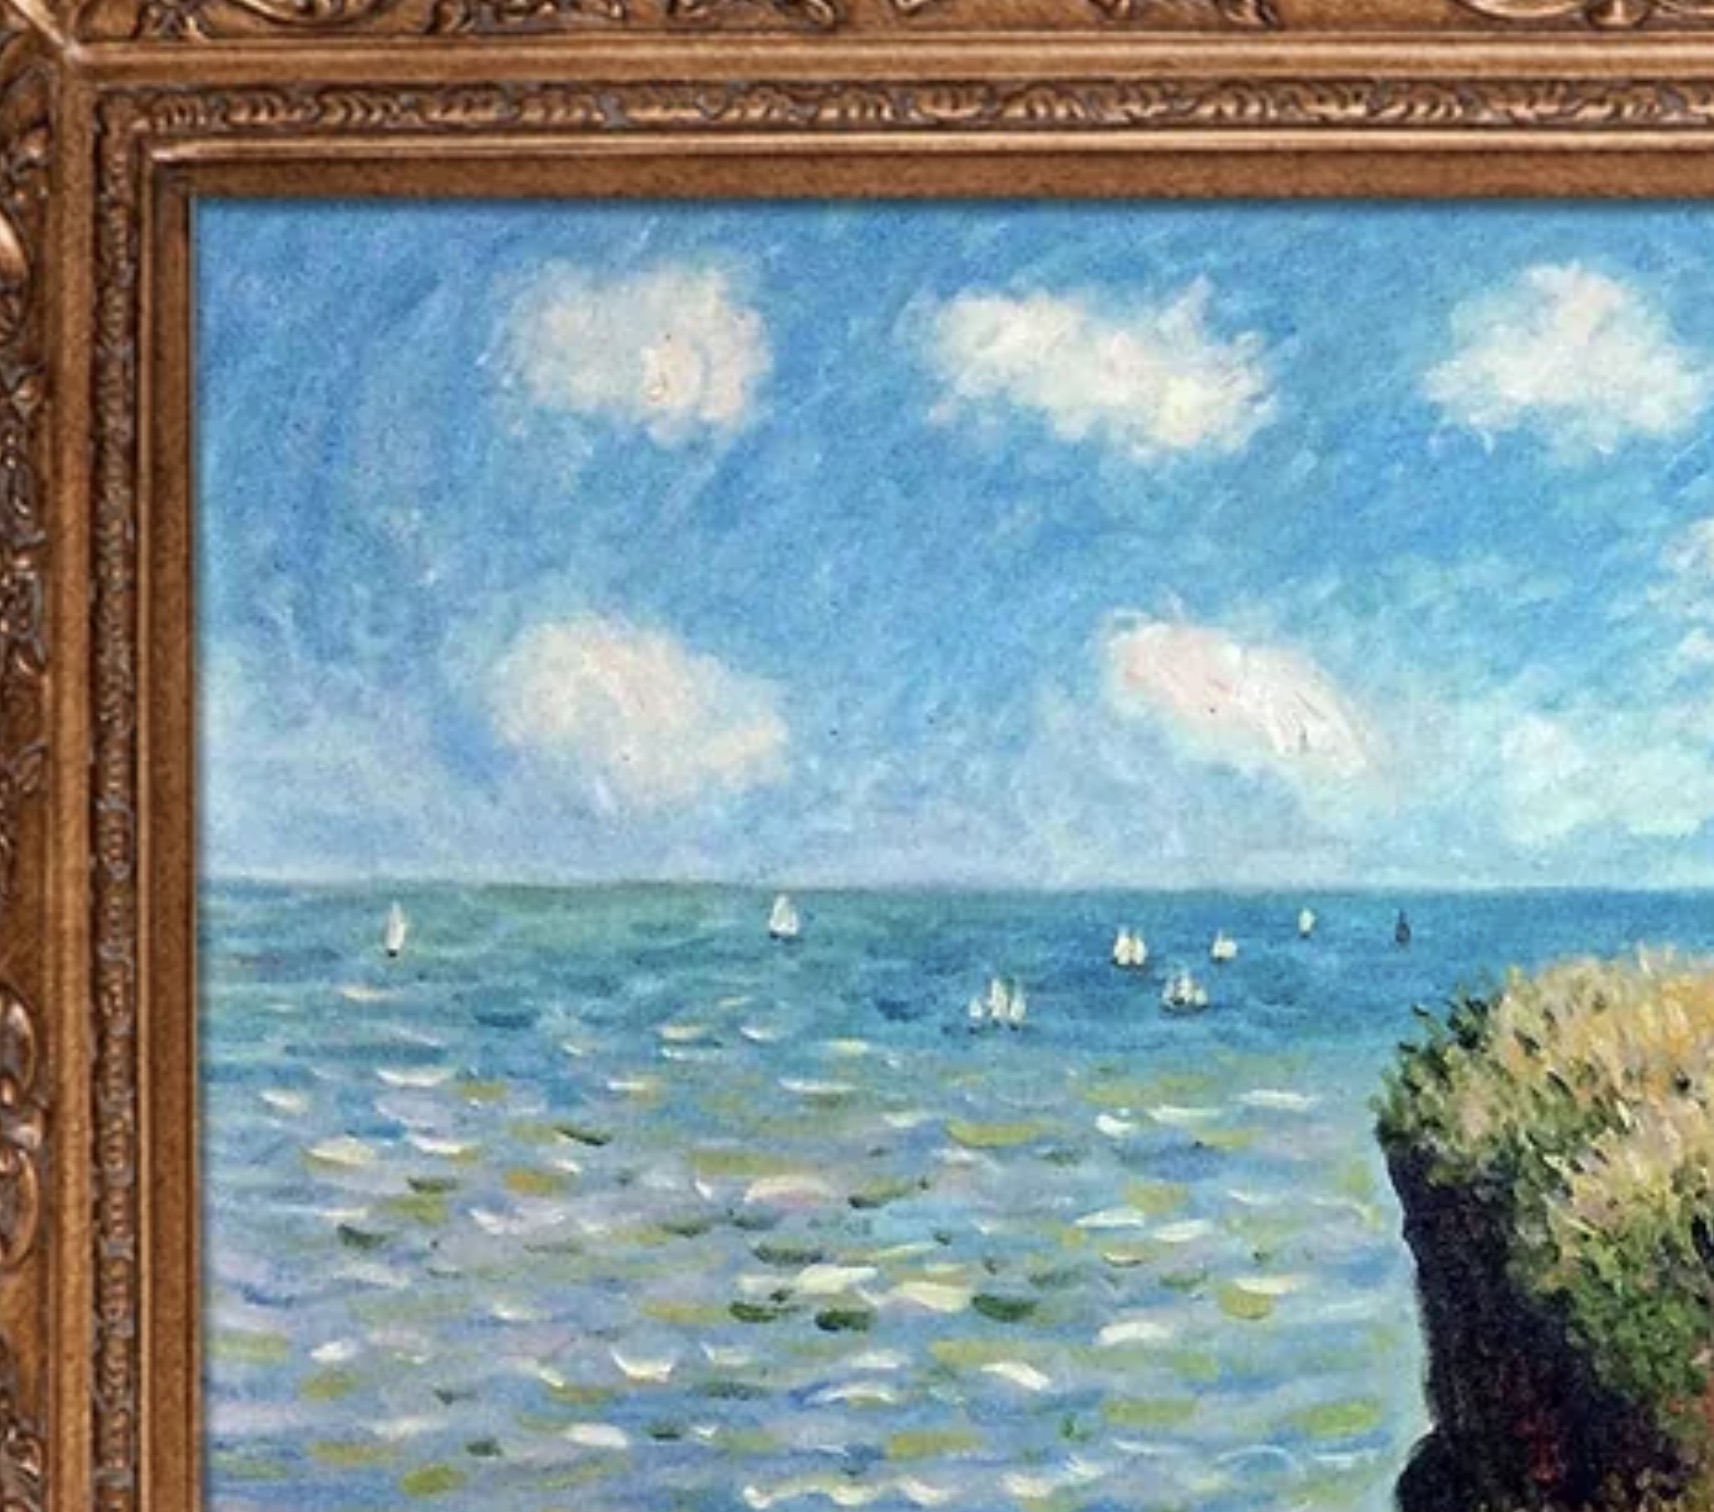 Claude Monet "Cliff Walk at Porville, 1882" Oil Painting, After - Image 3 of 6